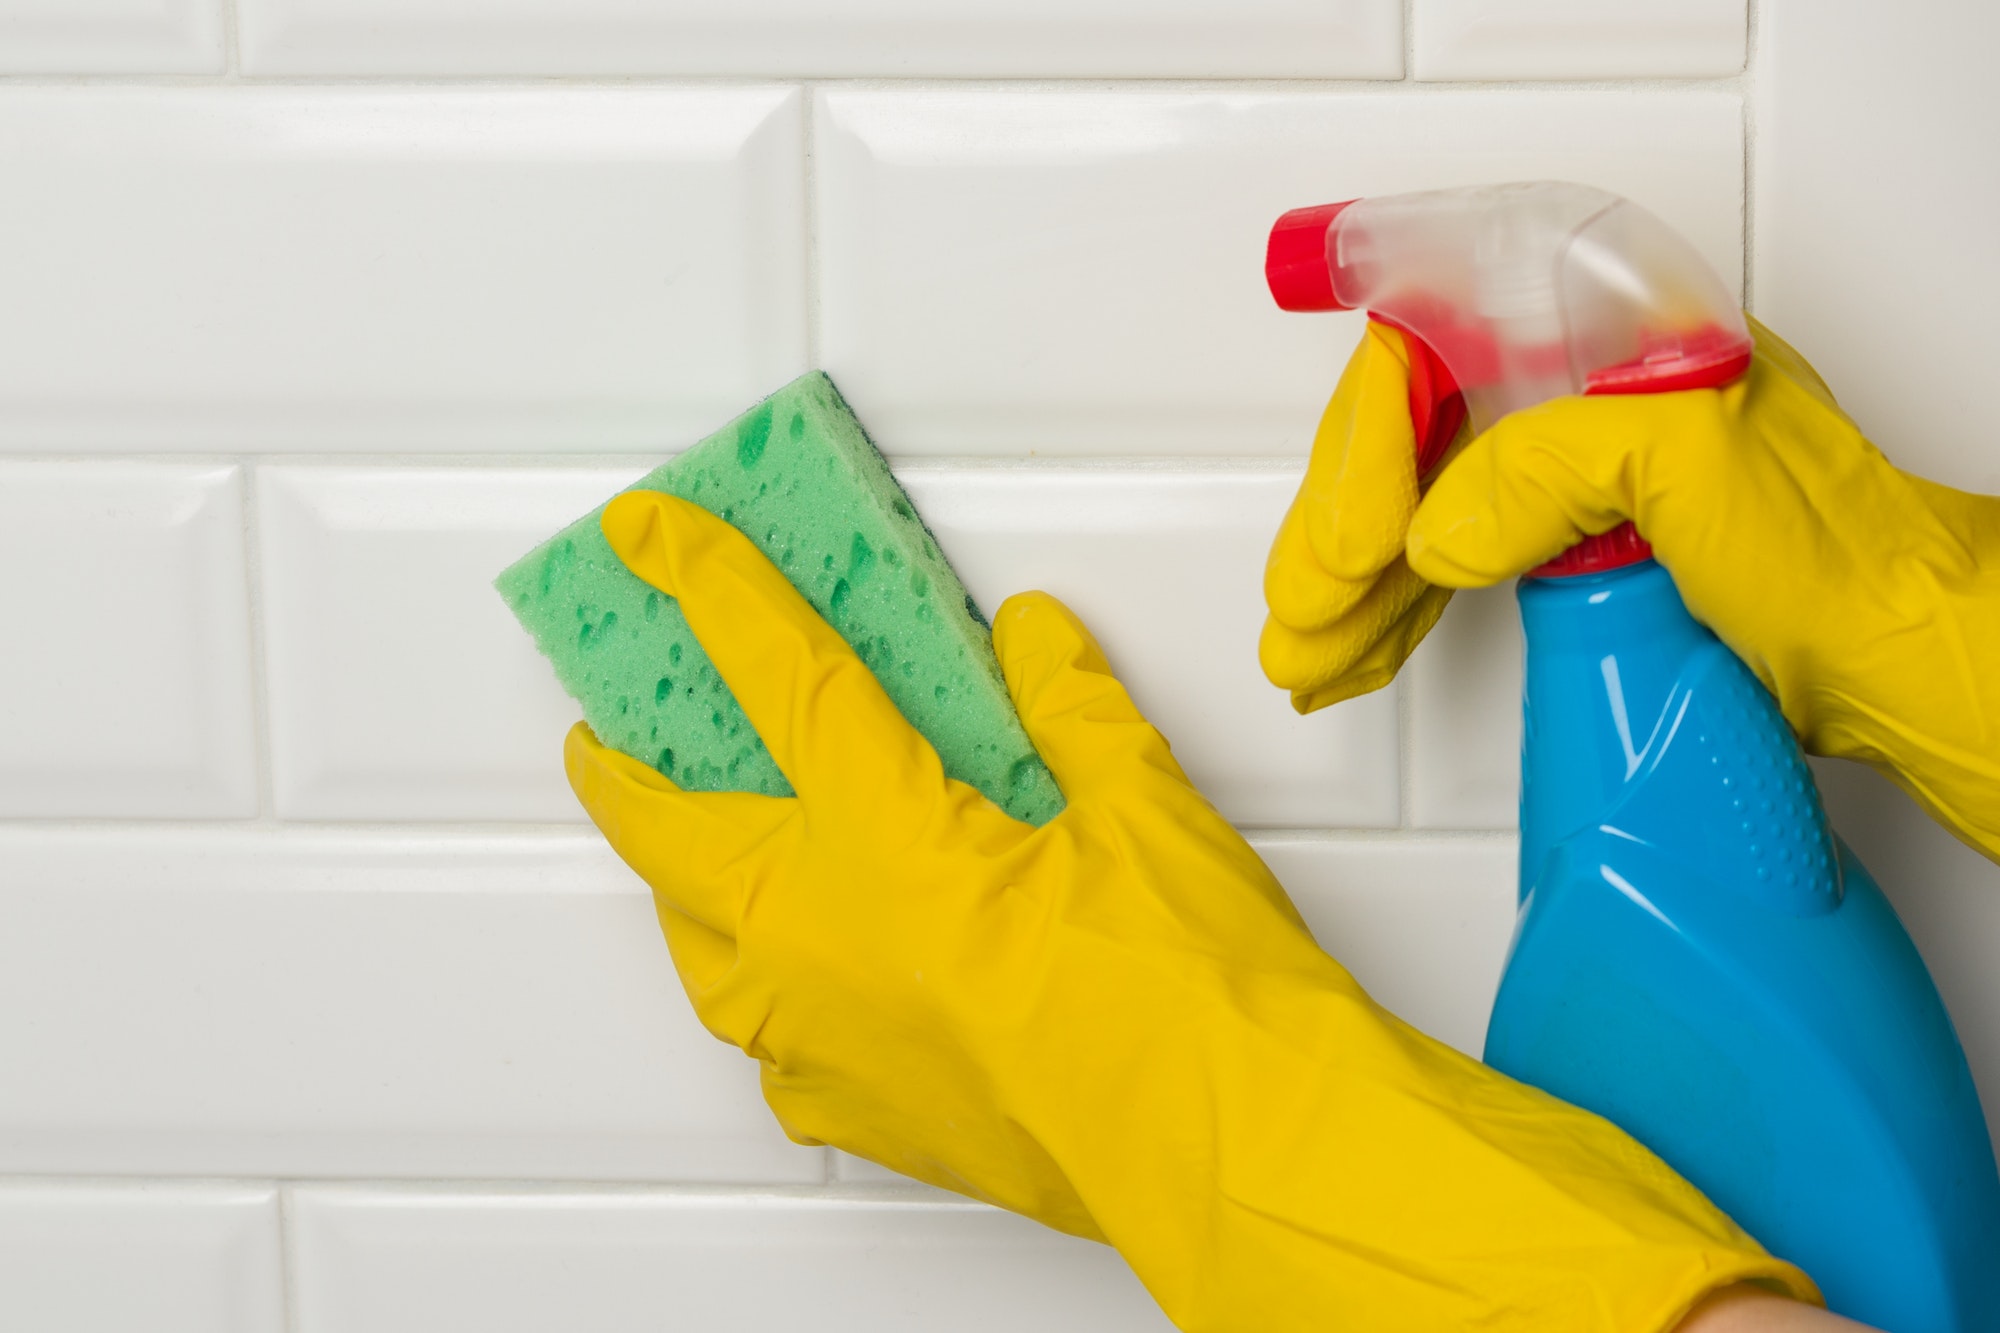 Professional cleaning service. Hands in rubber protective gloves with detergent and sponge